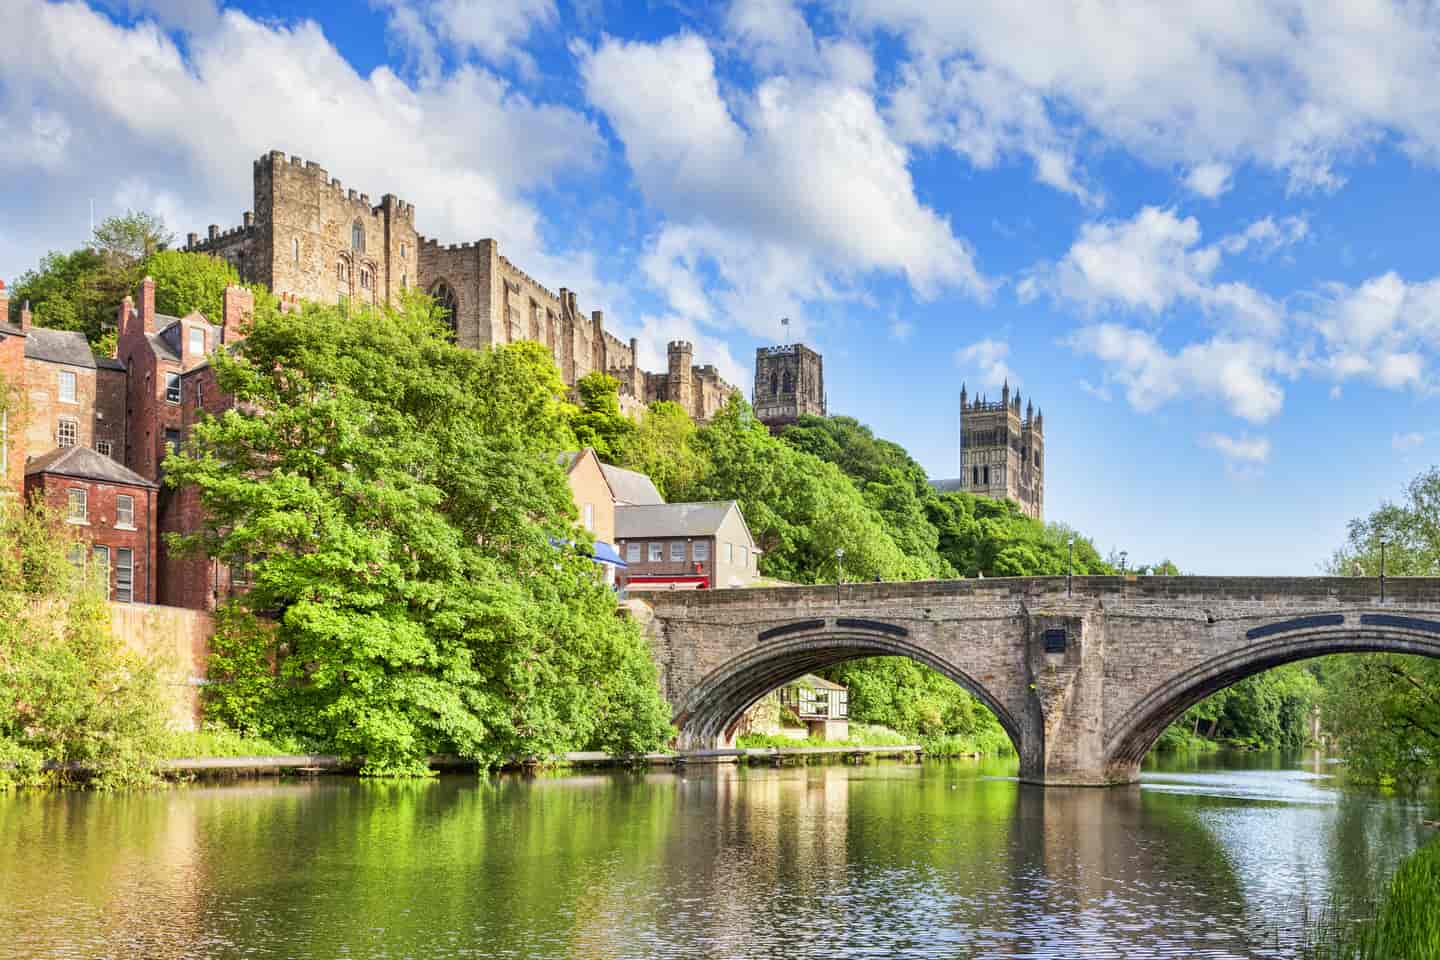 Student Accommodation in Durham - Framwellgate Bridge and Durham Castle from the River Wear